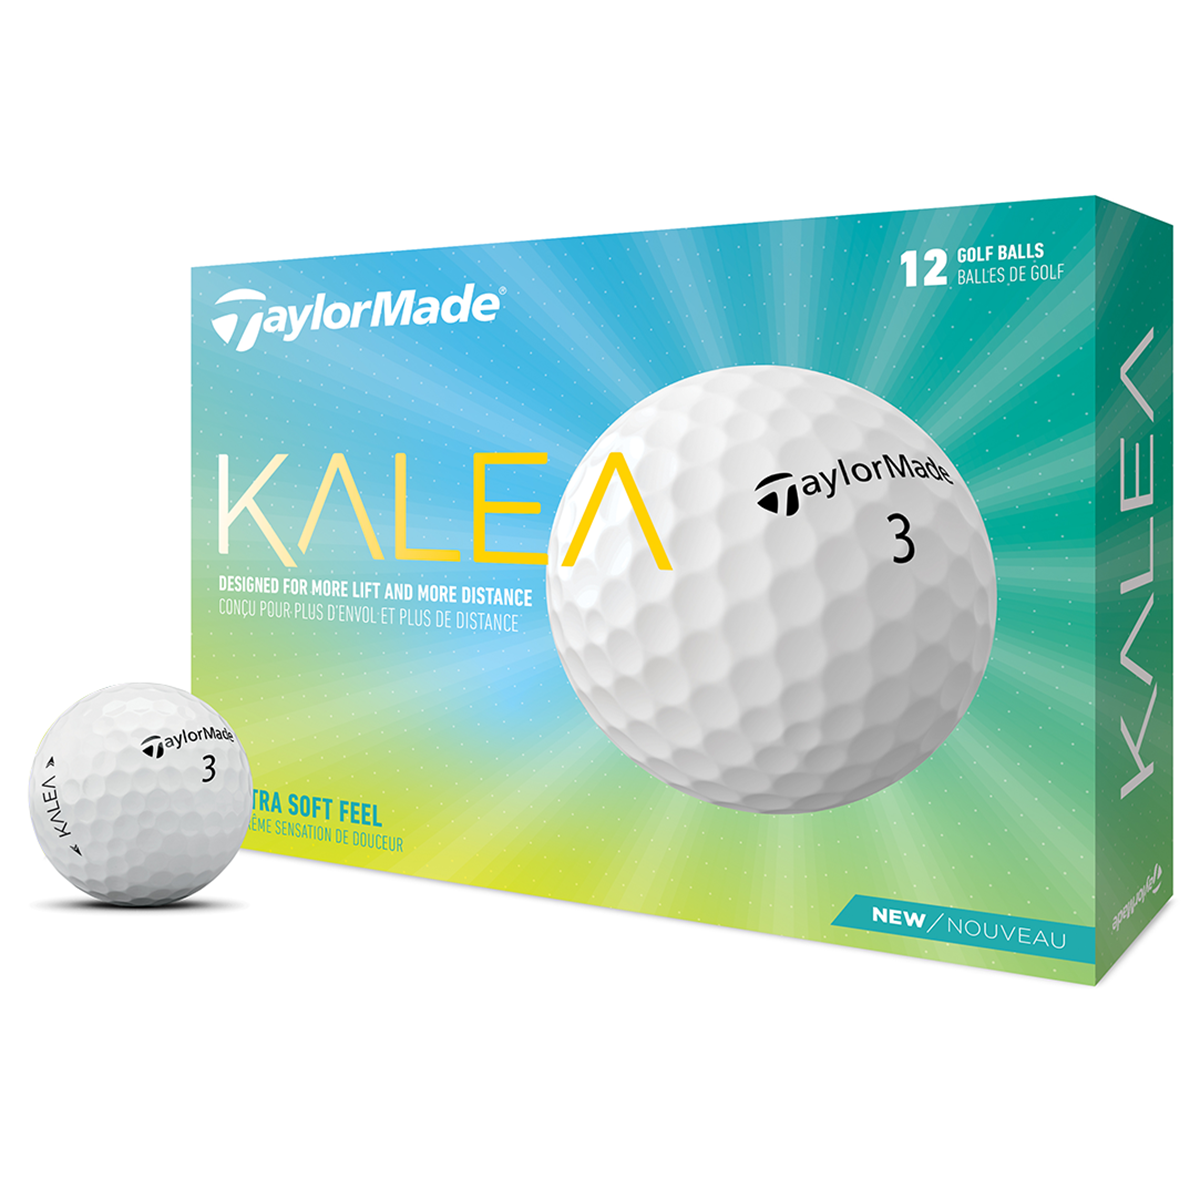 TaylorMade White Dimple Kalea 12 Golf Ball Pack 2022| American Golf, One Size